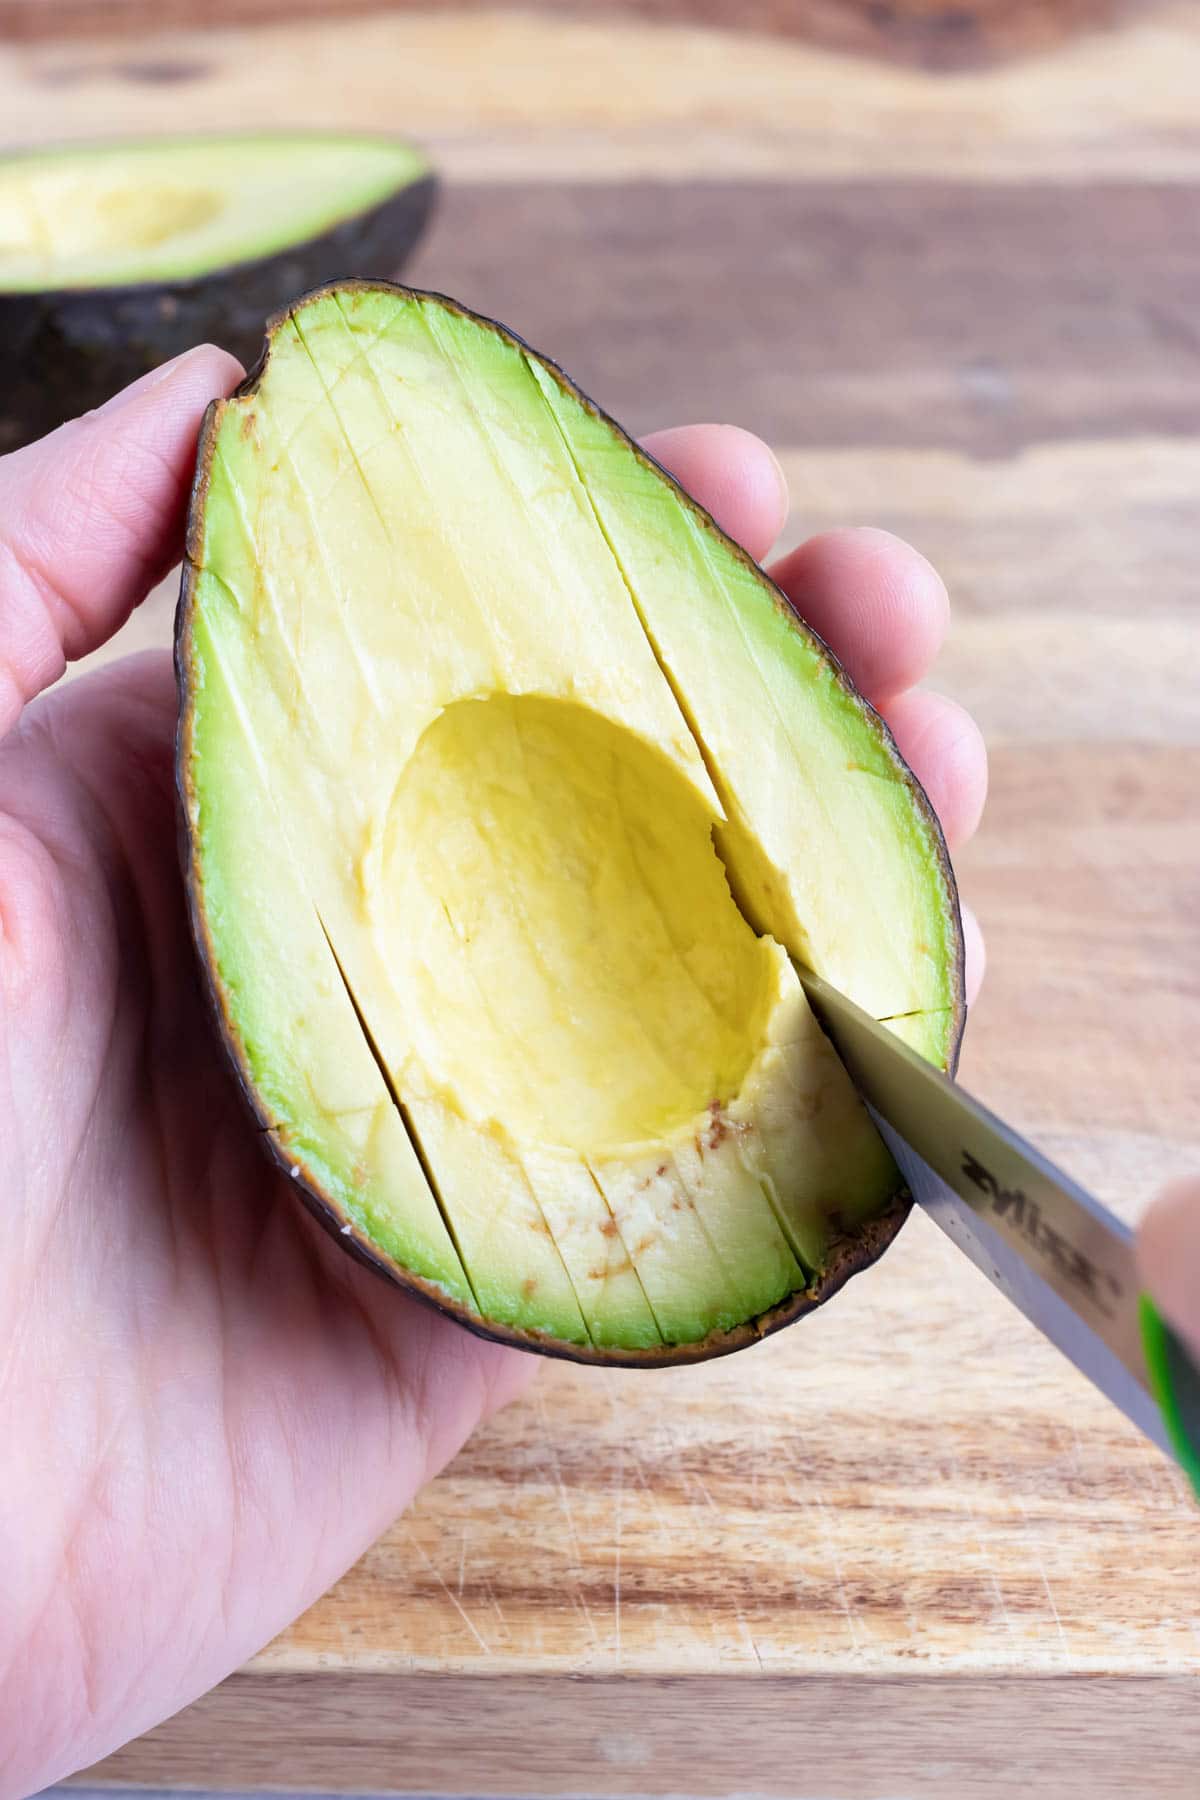 Use a knife to make small slices in the flesh of the avocado